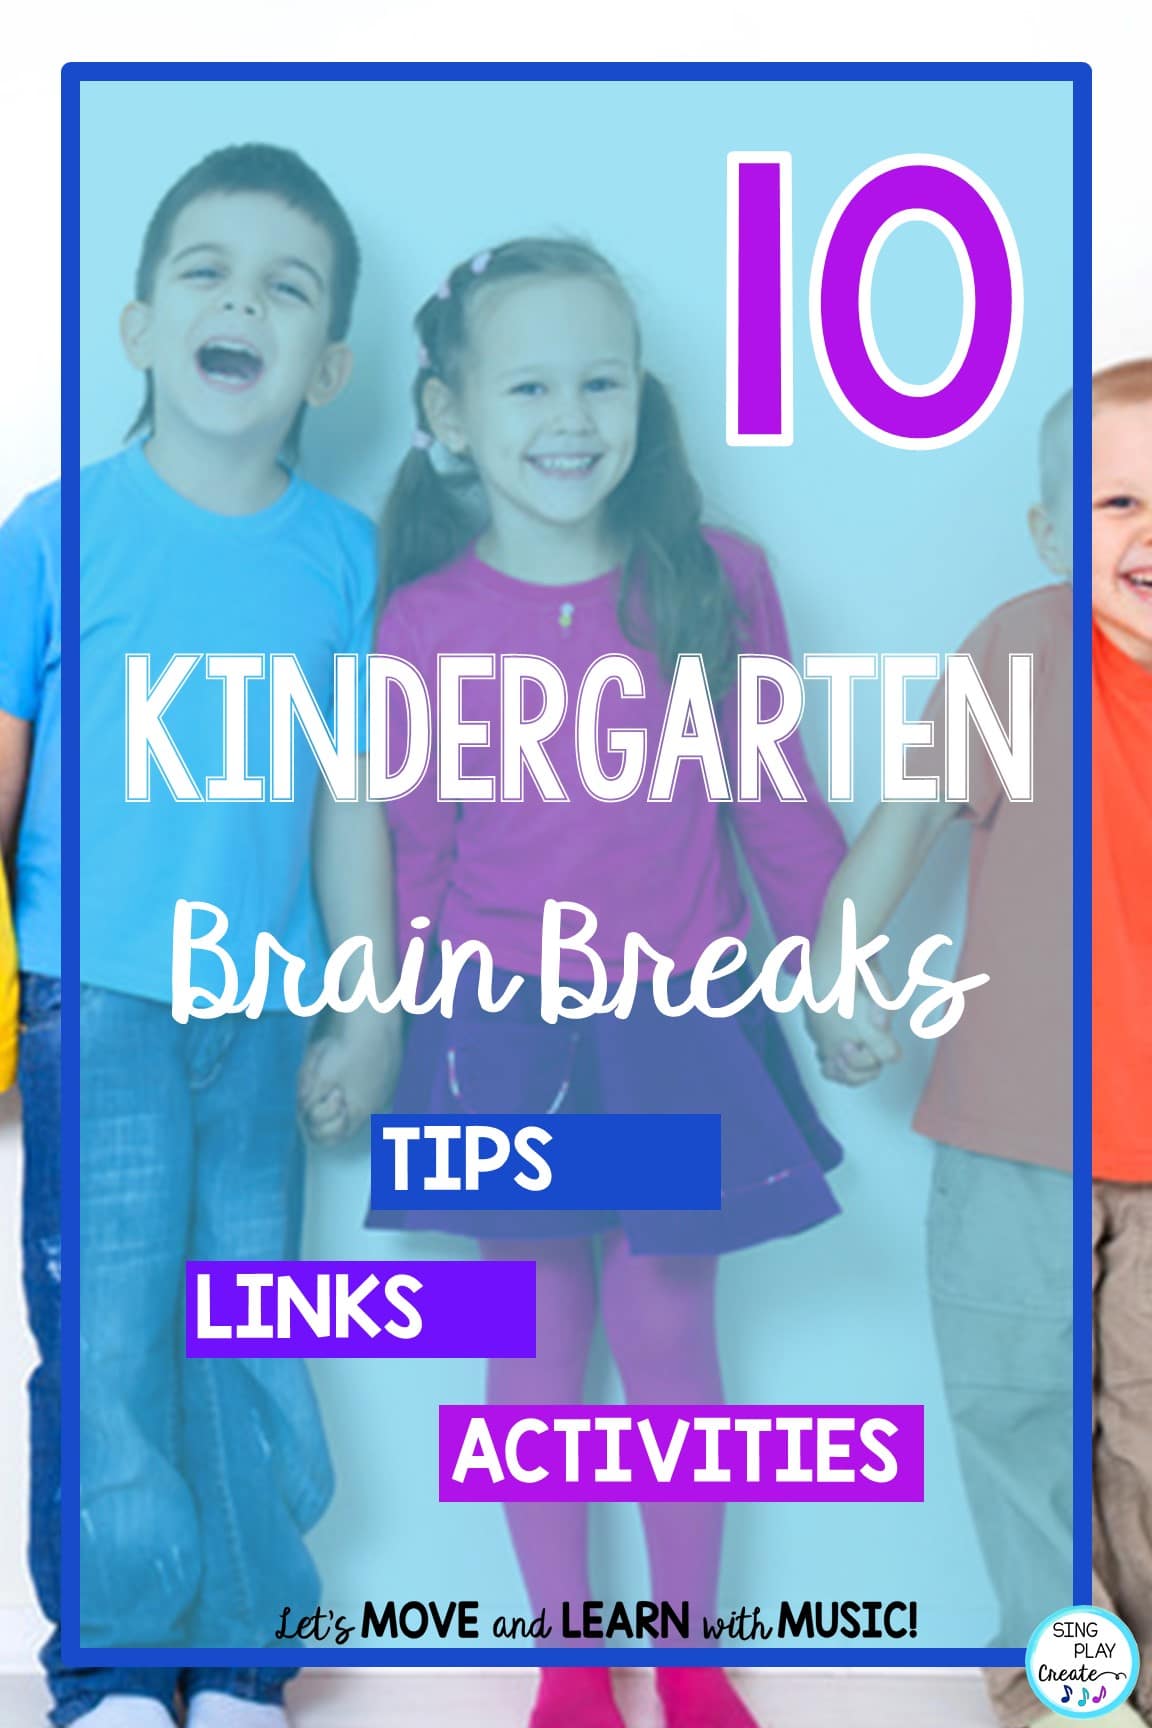 10 Kindergarten Brain Breaks. 
 Looking for some fun ways to break up learning routines?  Need an indoor recess activity?  Brain breaks are a great way to keep kids focused and have fun. I’ve got 10 kindergarten brain breaks you can use in your classroom any time.